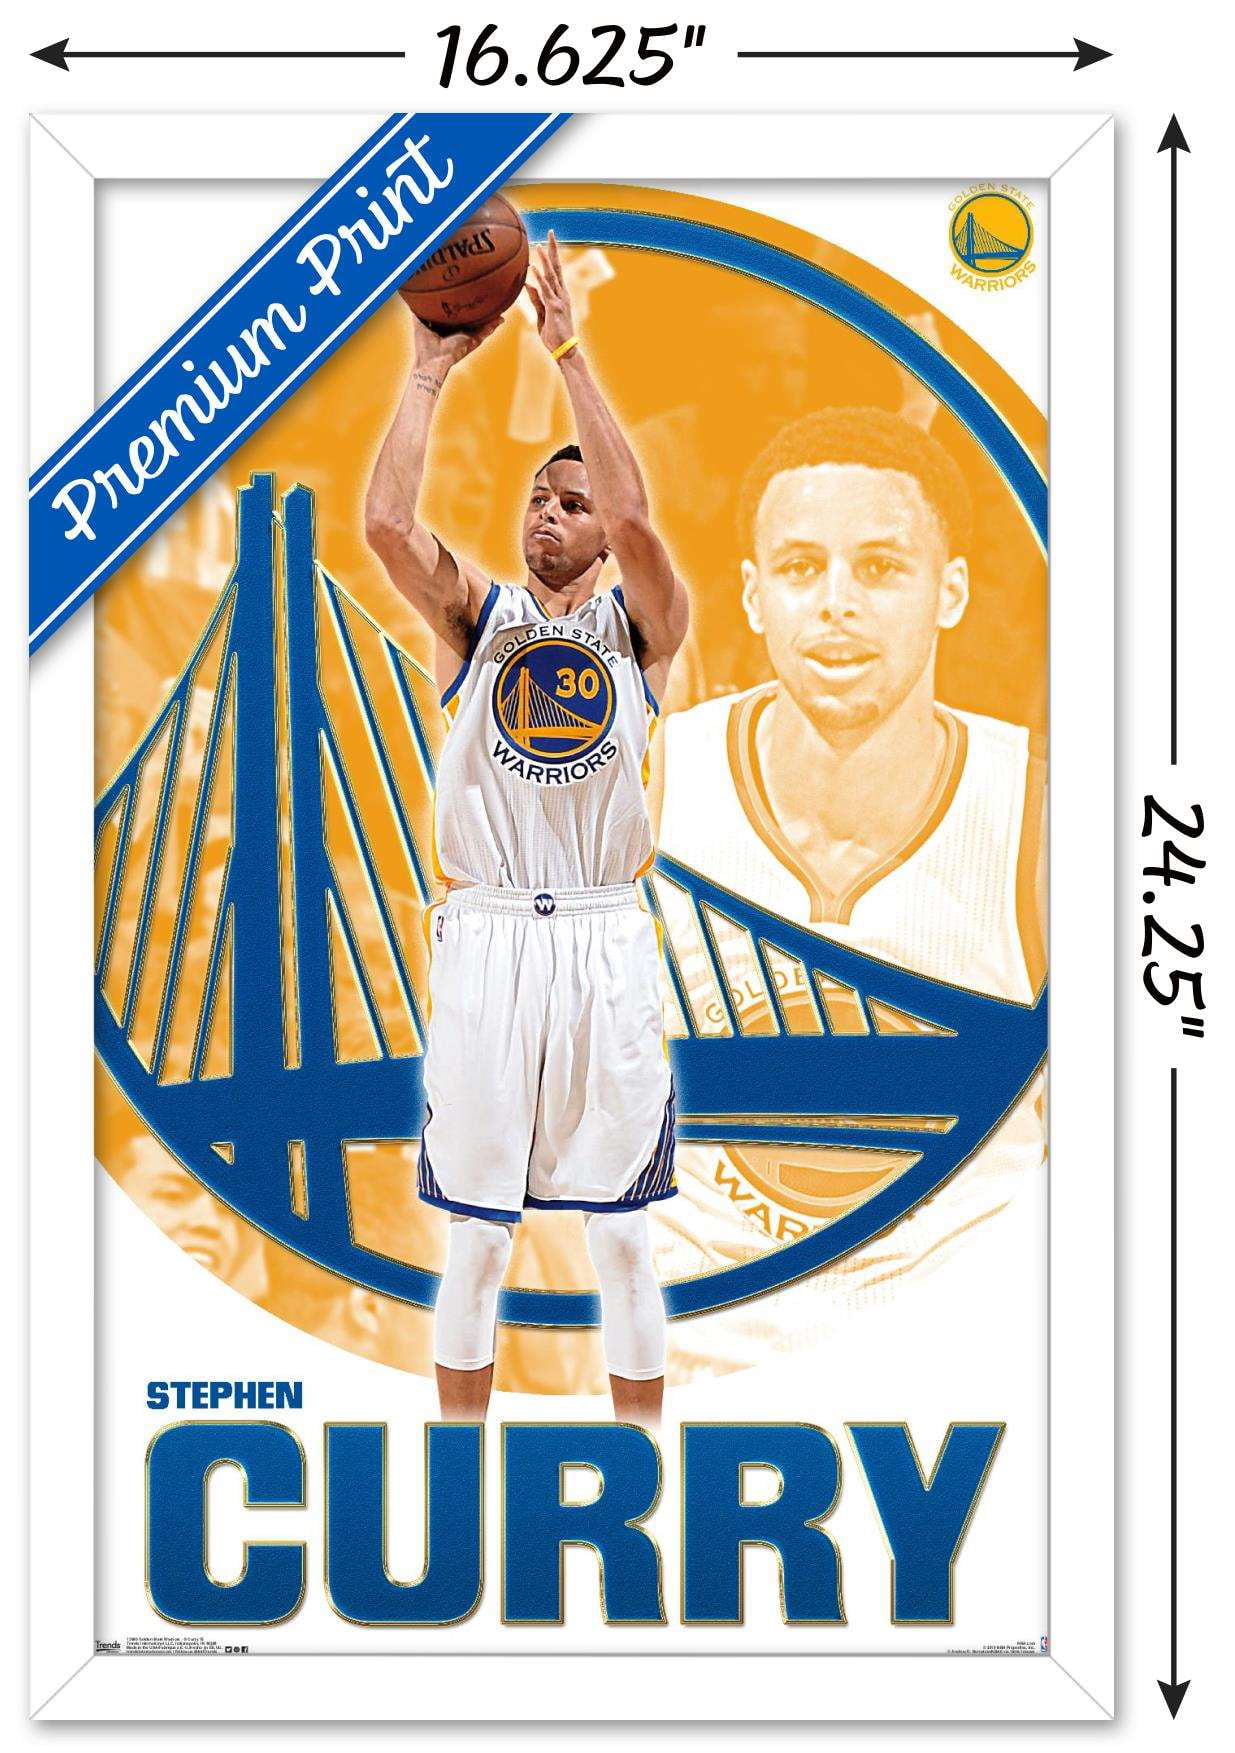 C STEPH CURRY WARRIORS Photo Quality Poster Choose a Size 